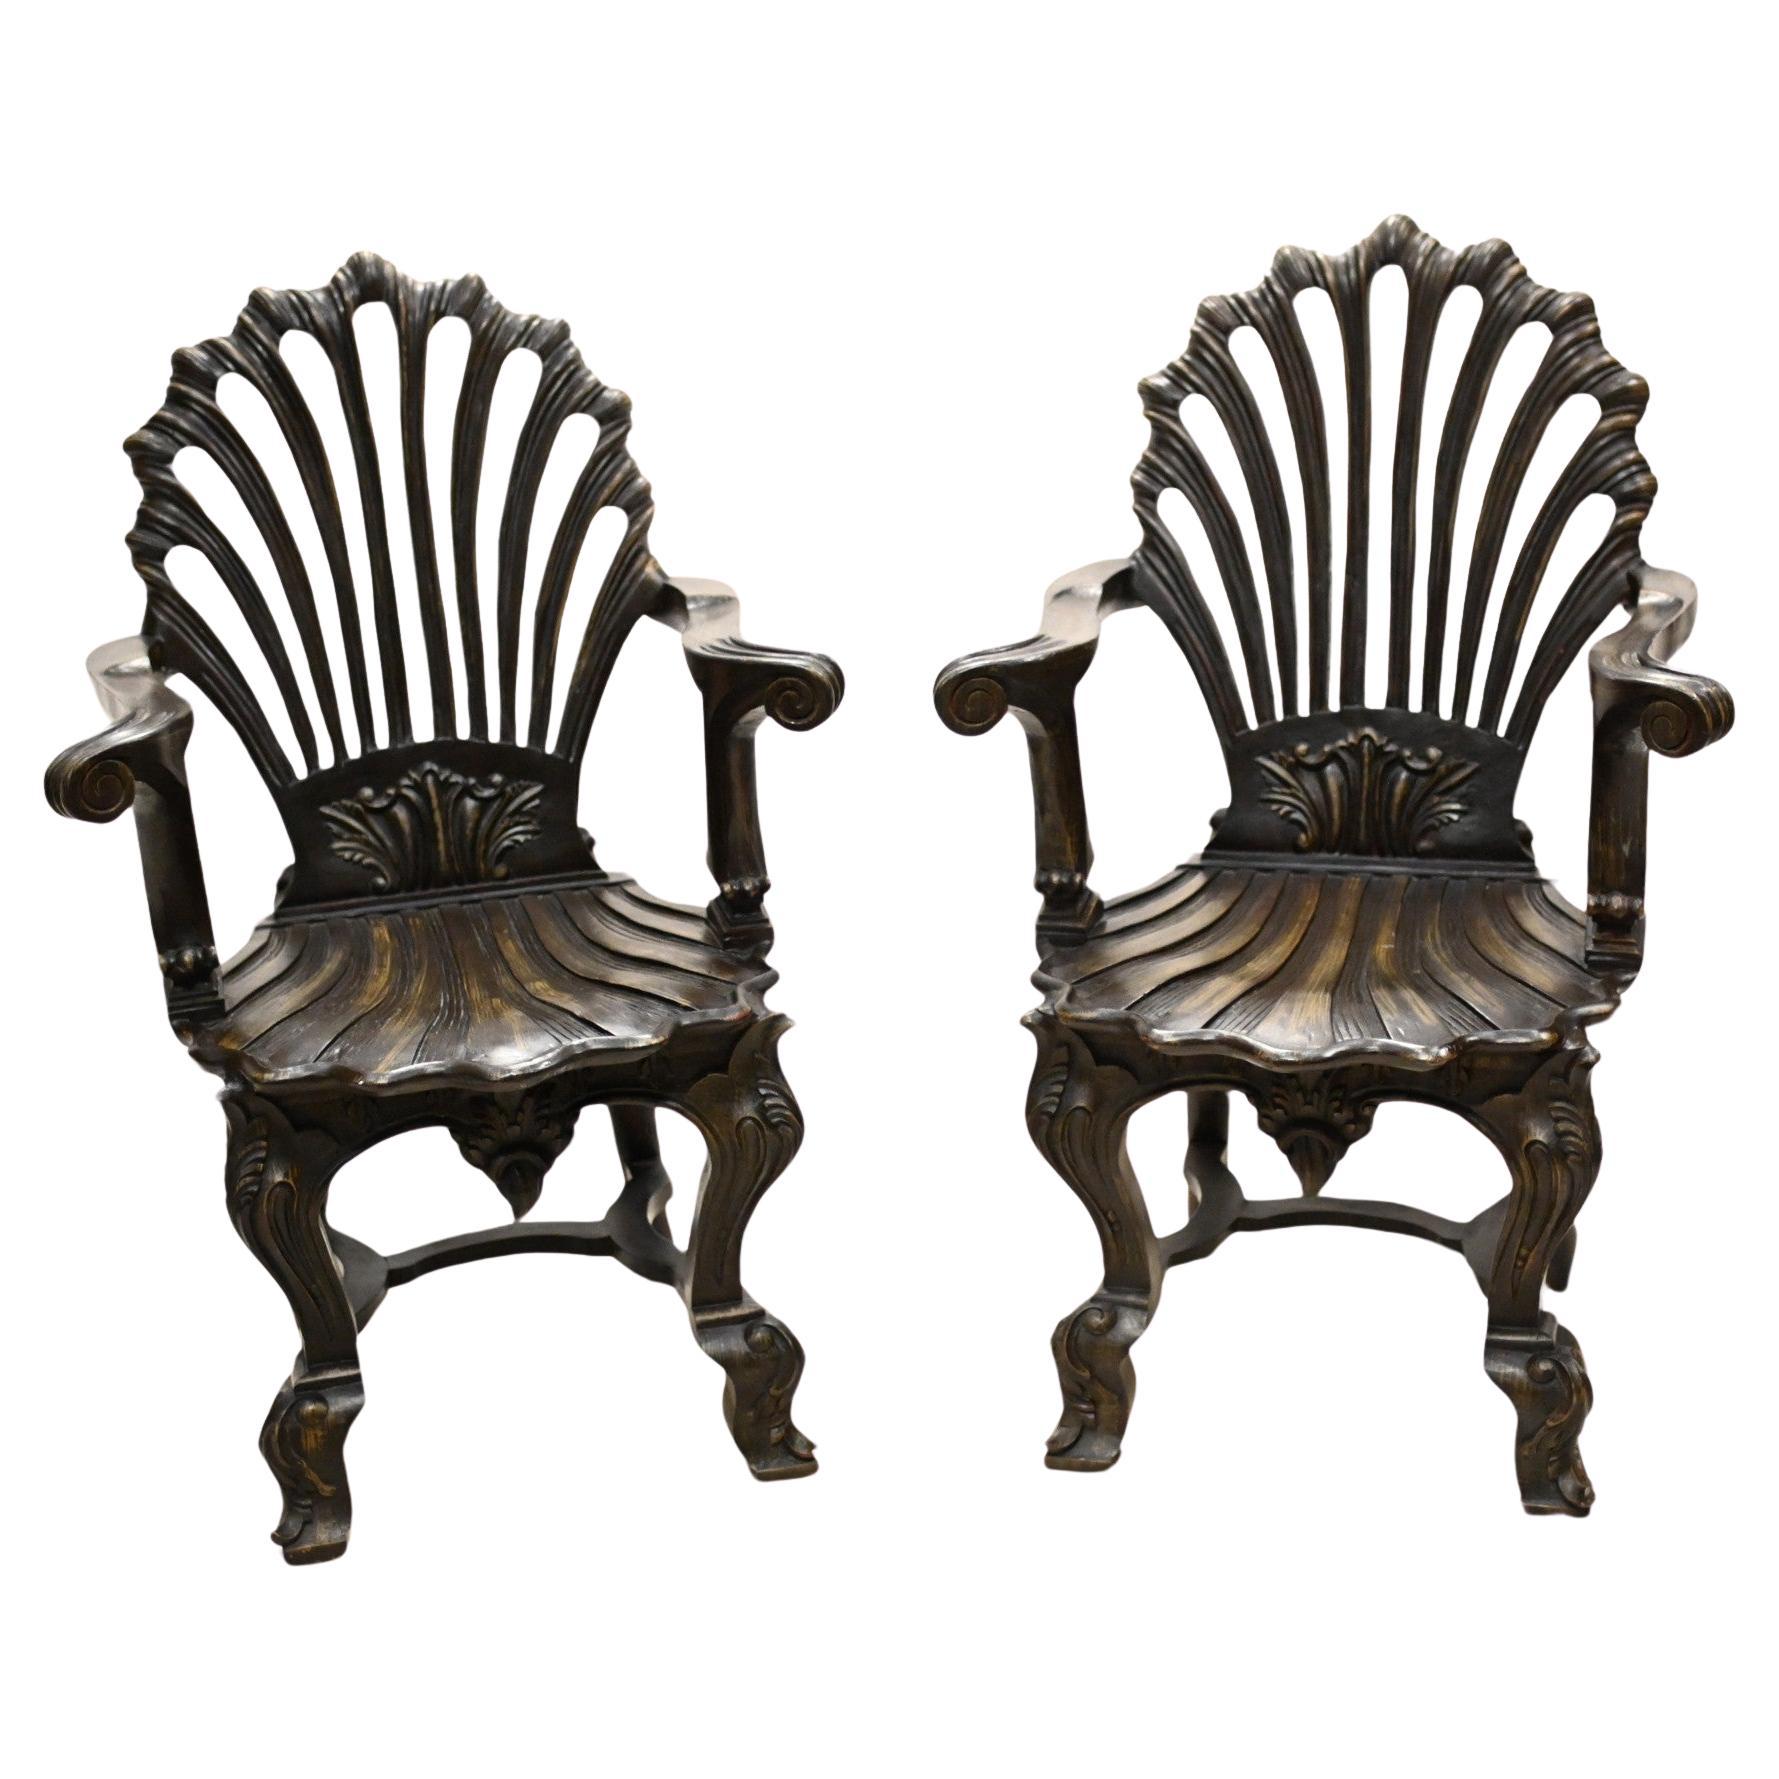 English Rococo Grotto Chairs Carved Seats 1930 For Sale